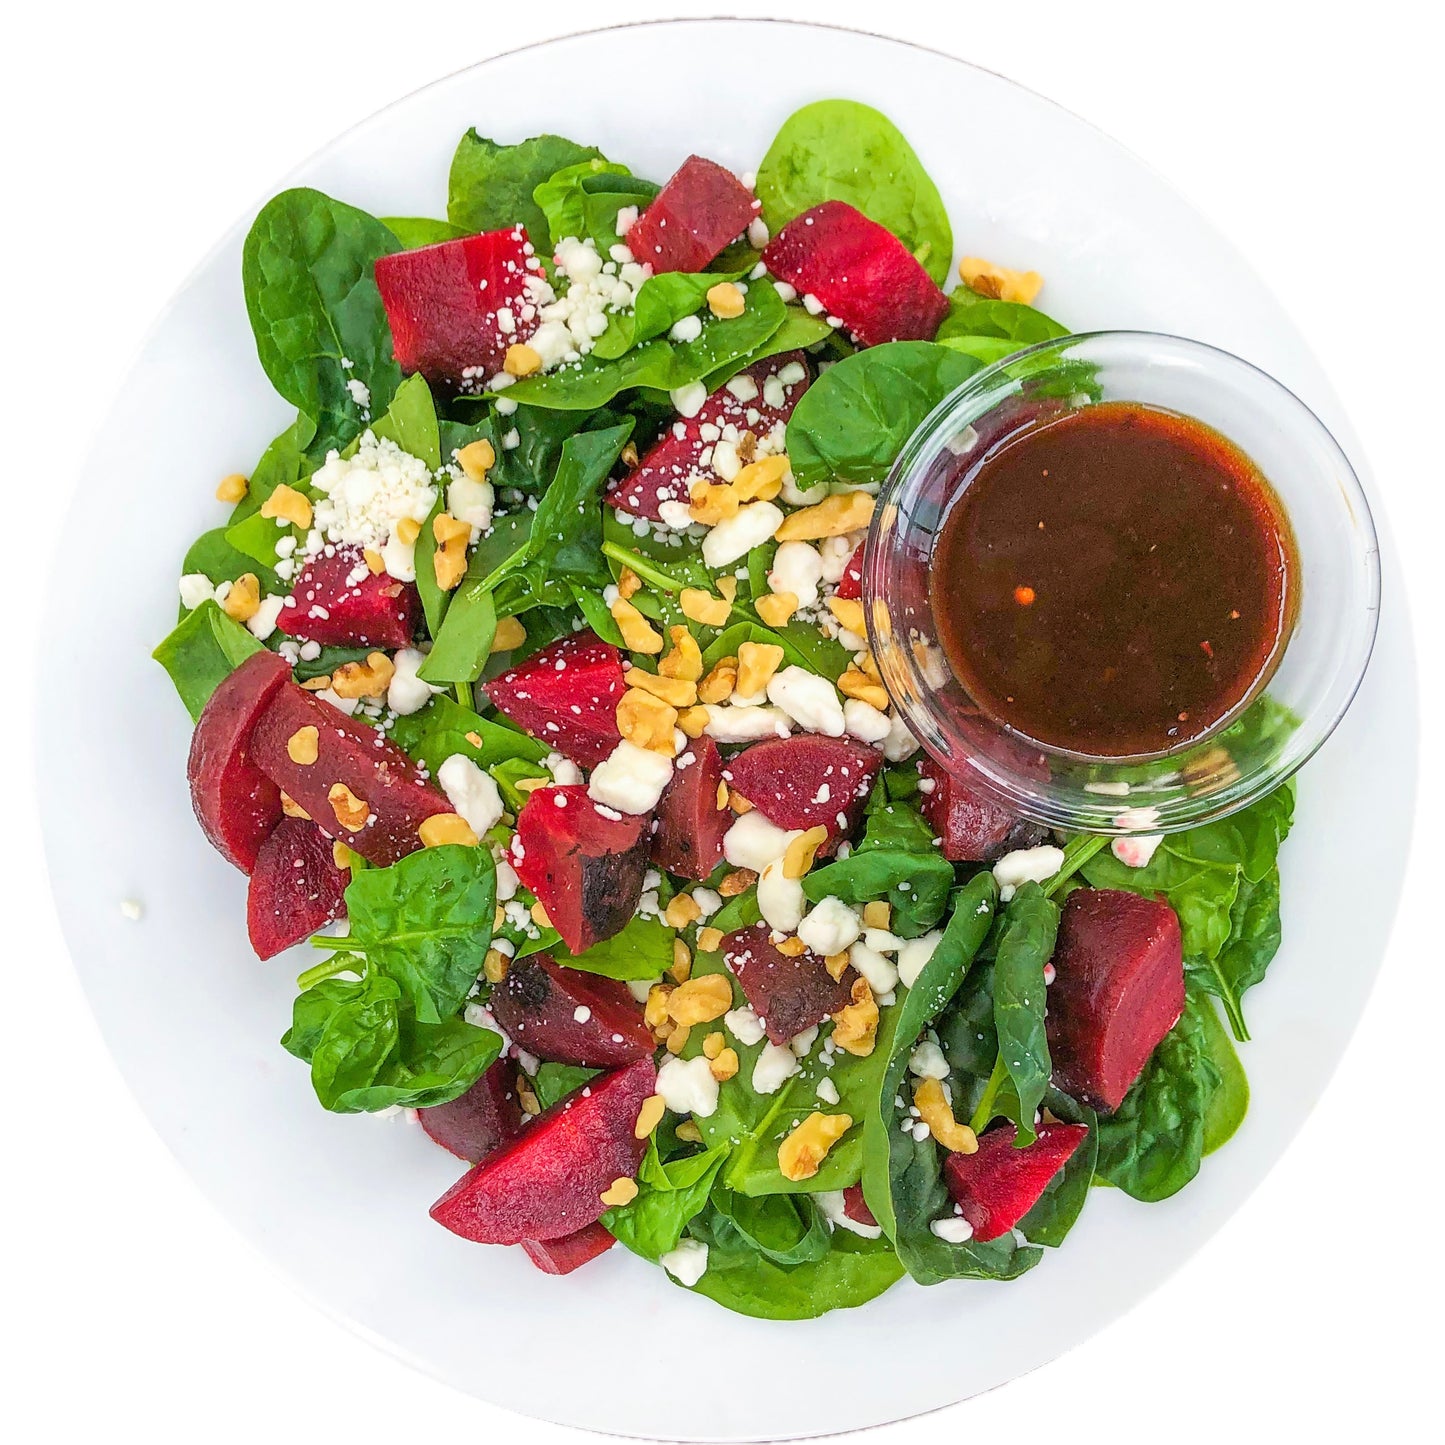 ROASTED BEET AND GOAT CHEESE SALAD with BALSAMIC VINAIGRETTE